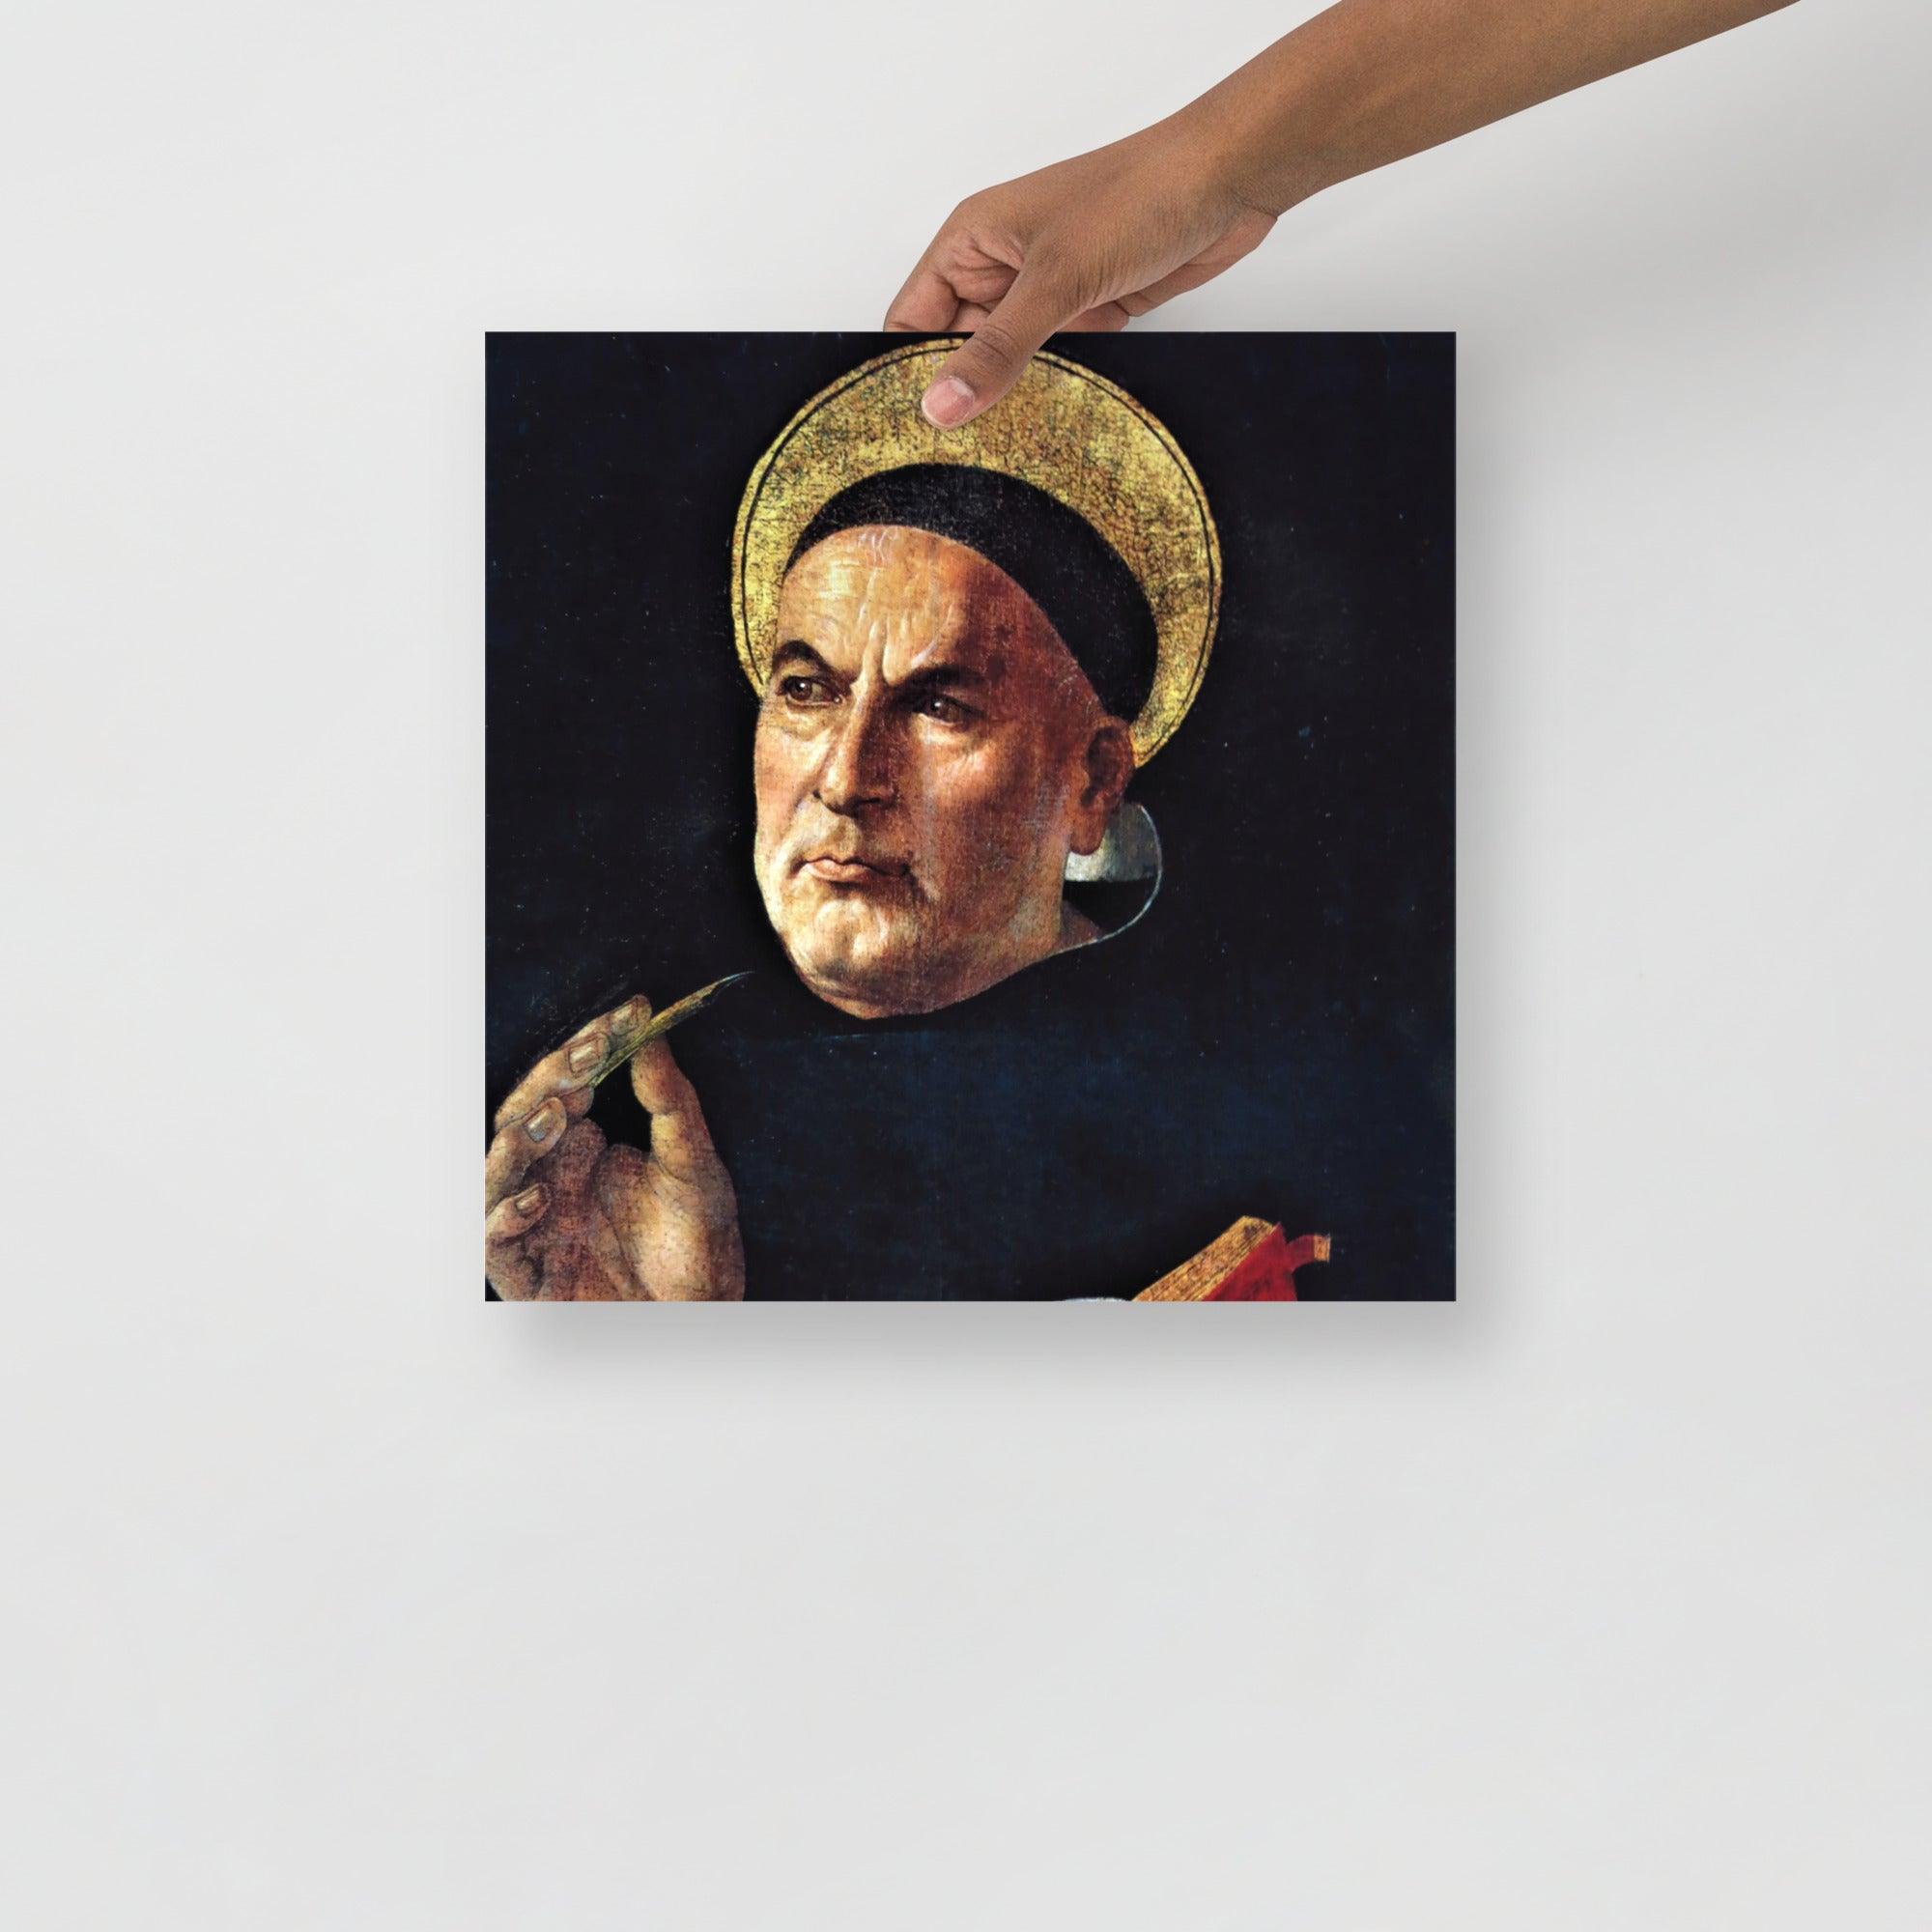 A St. Thomas Aquinas by Sandro Botticelli poster on a plain backdrop in size 14x14”.